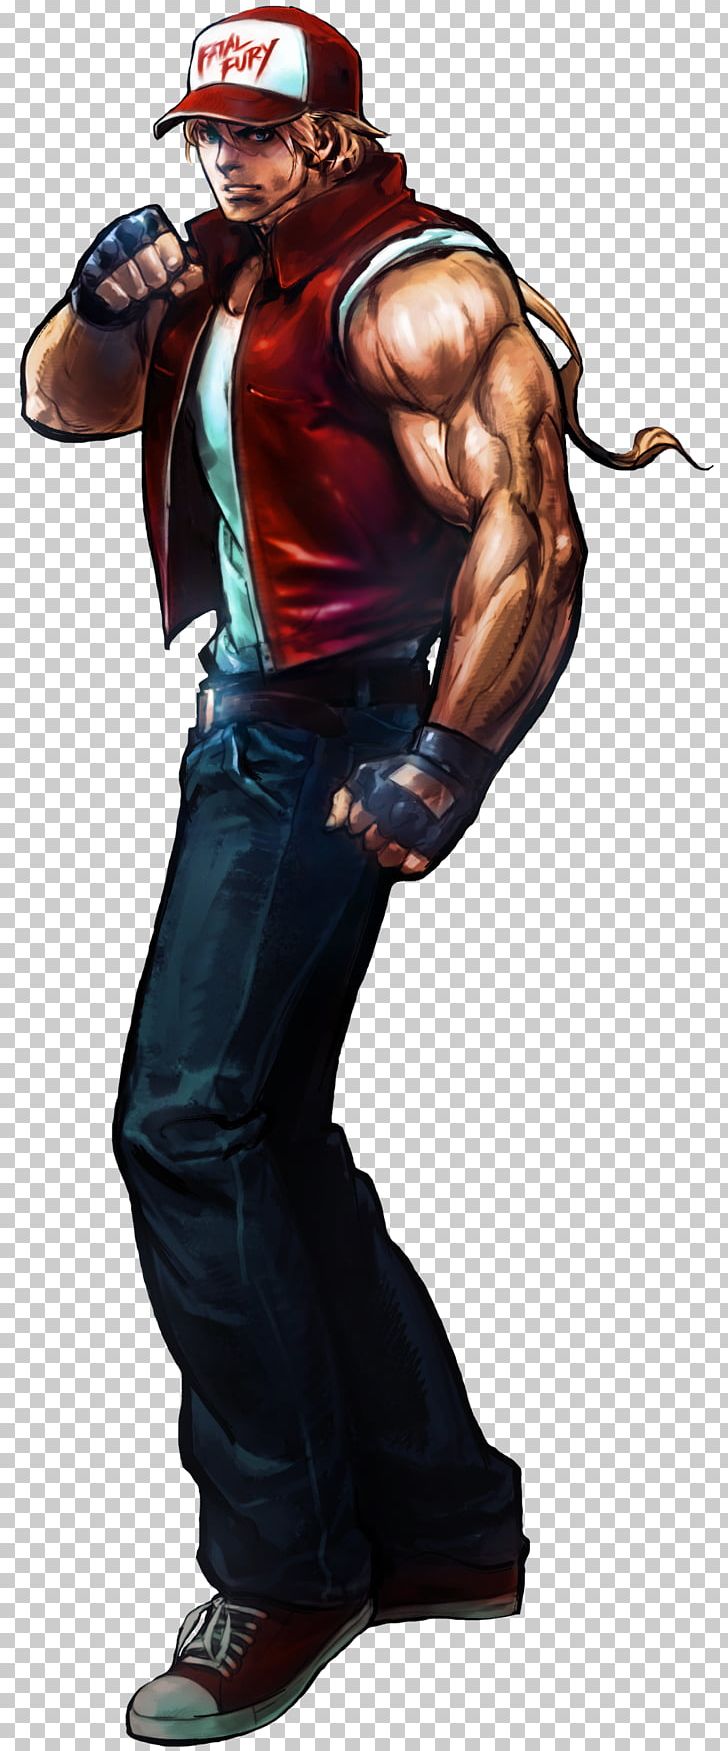 The King Of Fighters XIII Terry Bogard Capcom Vs. SNK: Millennium Fight 2000 Andy Bogard The King Of Fighters 2002 PNG, Clipart, Andy Bogard, Arm, Fatal Fury, Fictional Character, Game Free PNG Download